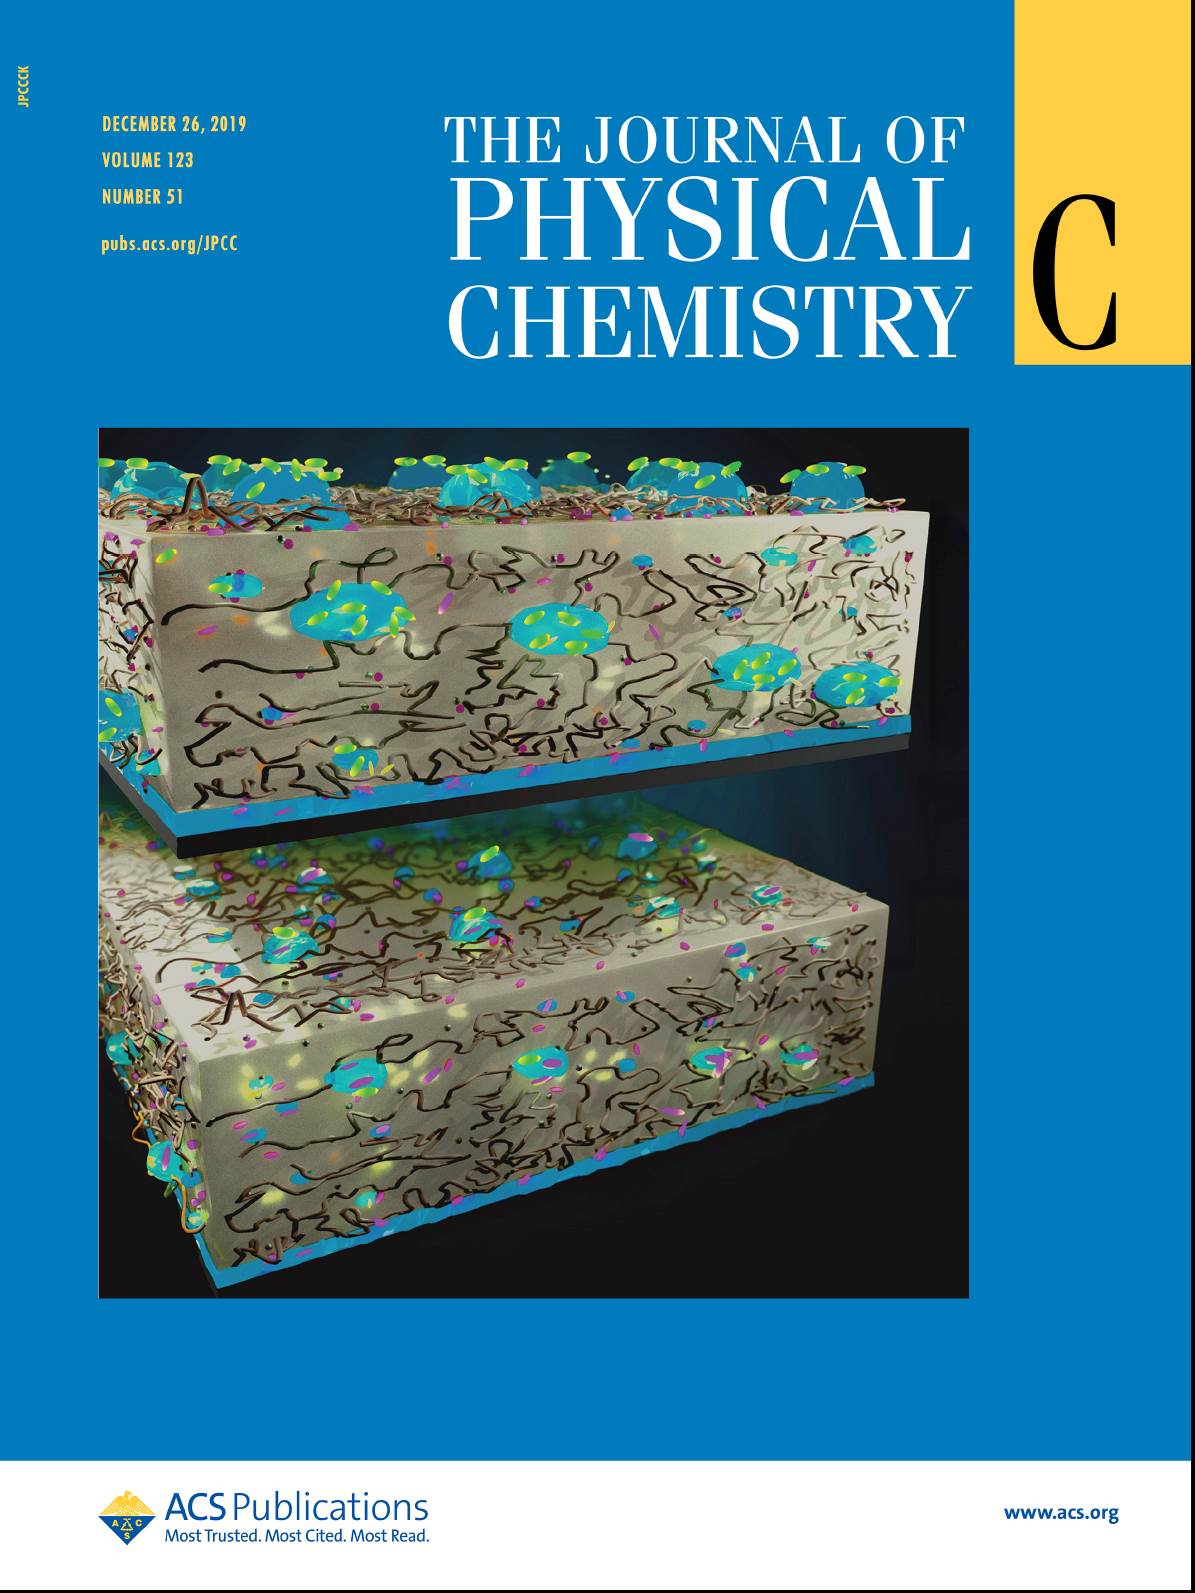 Our thin film work is featured in J. Phys. Chem. C